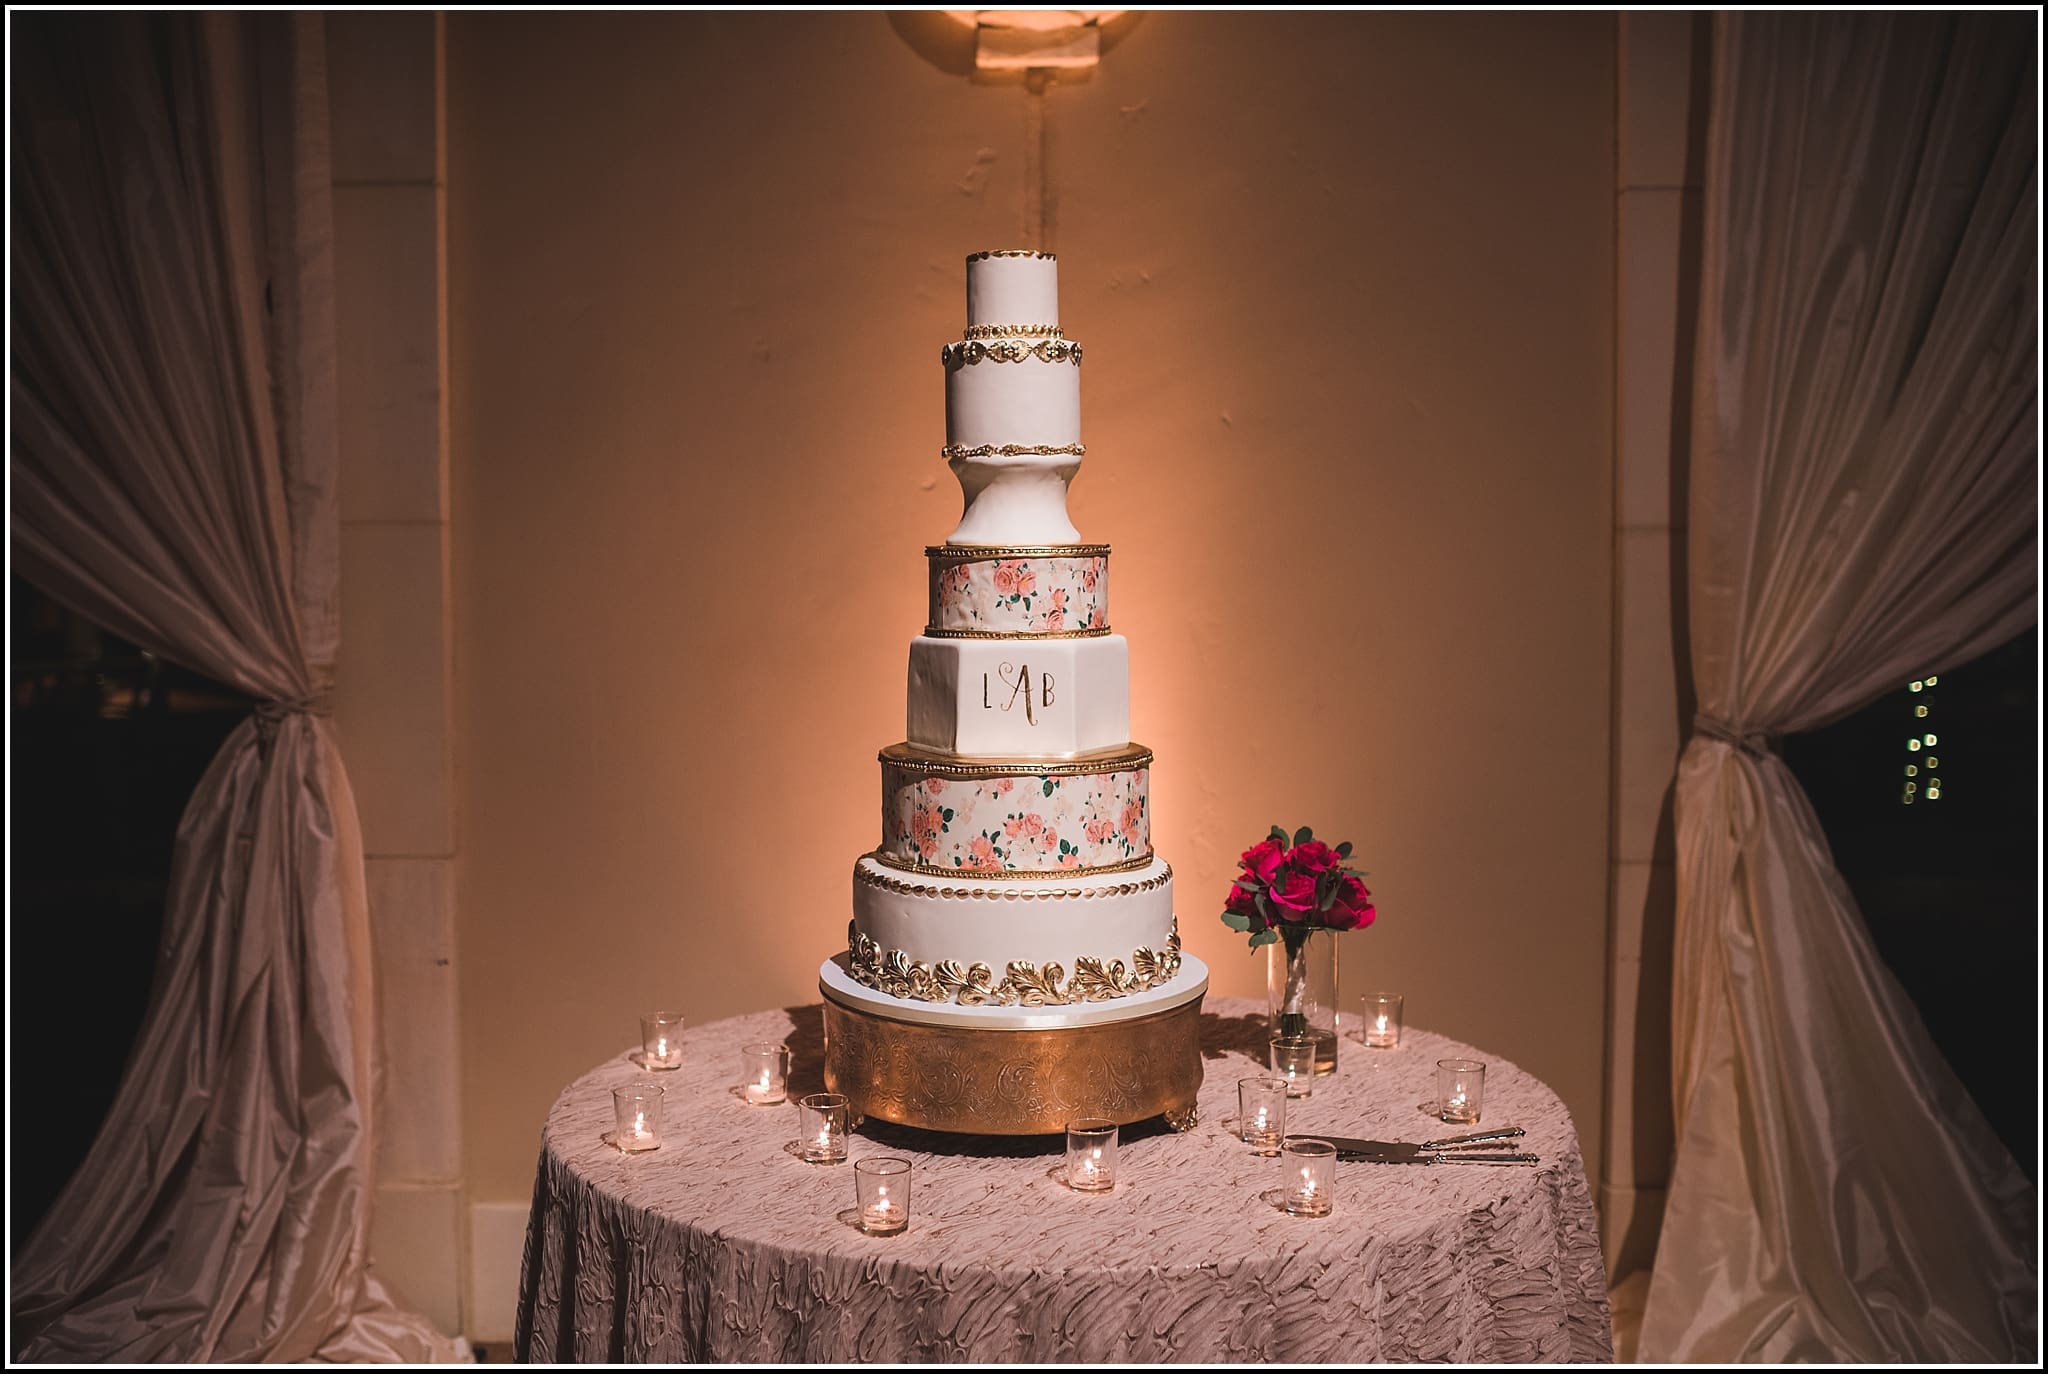  favorite wedding images 2016, wedding photos from 2016, our favorite wedding photos, romantic wedding cake, 8 tier wedding cake, hand painted wedding cake